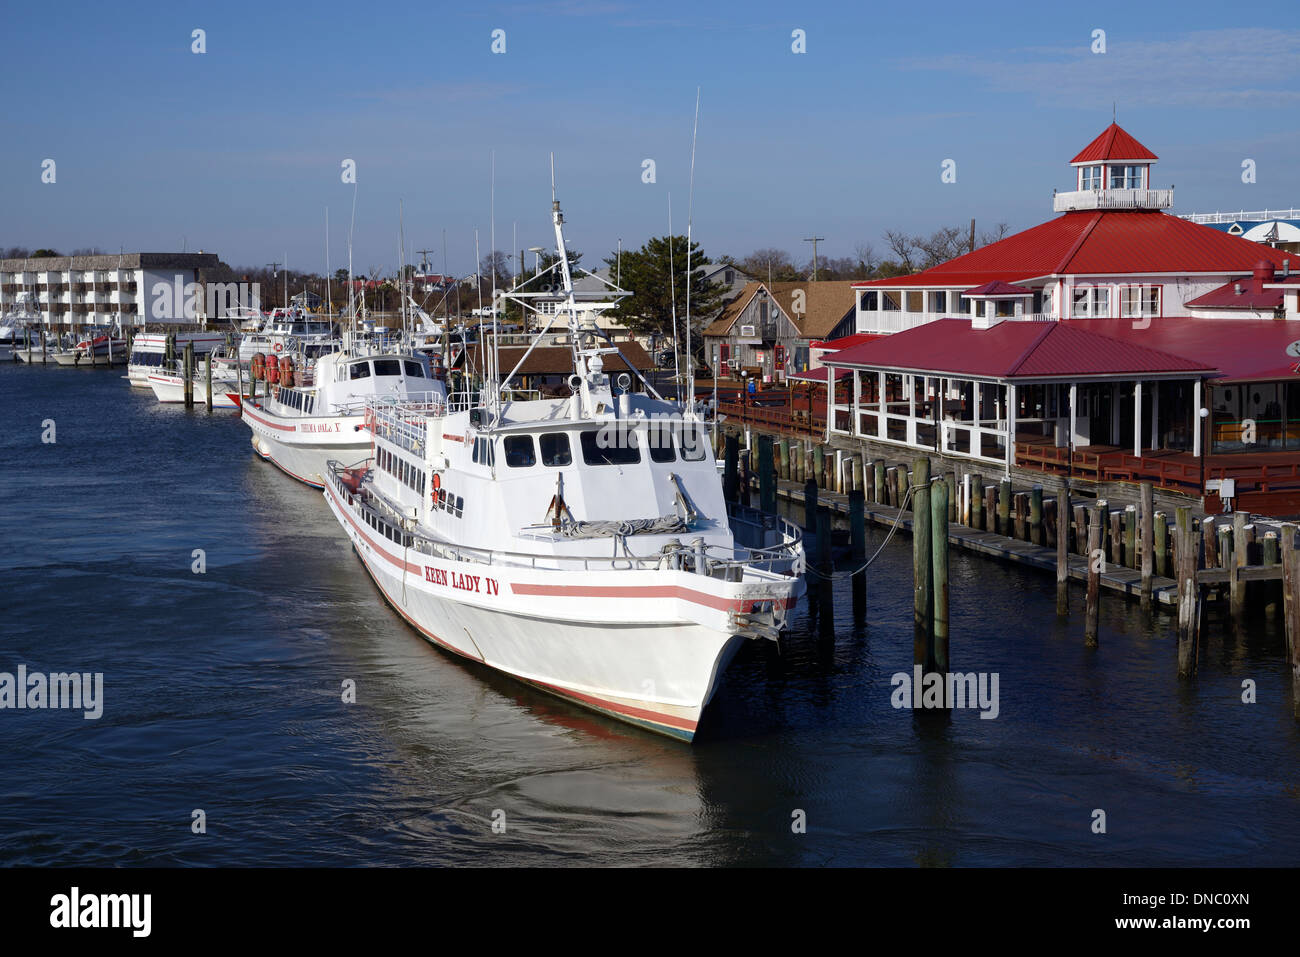 Marina view, Lewes, Delaware USA with white charter boats at the lined up along the dock near a red roofed restaurant. Stock Photo